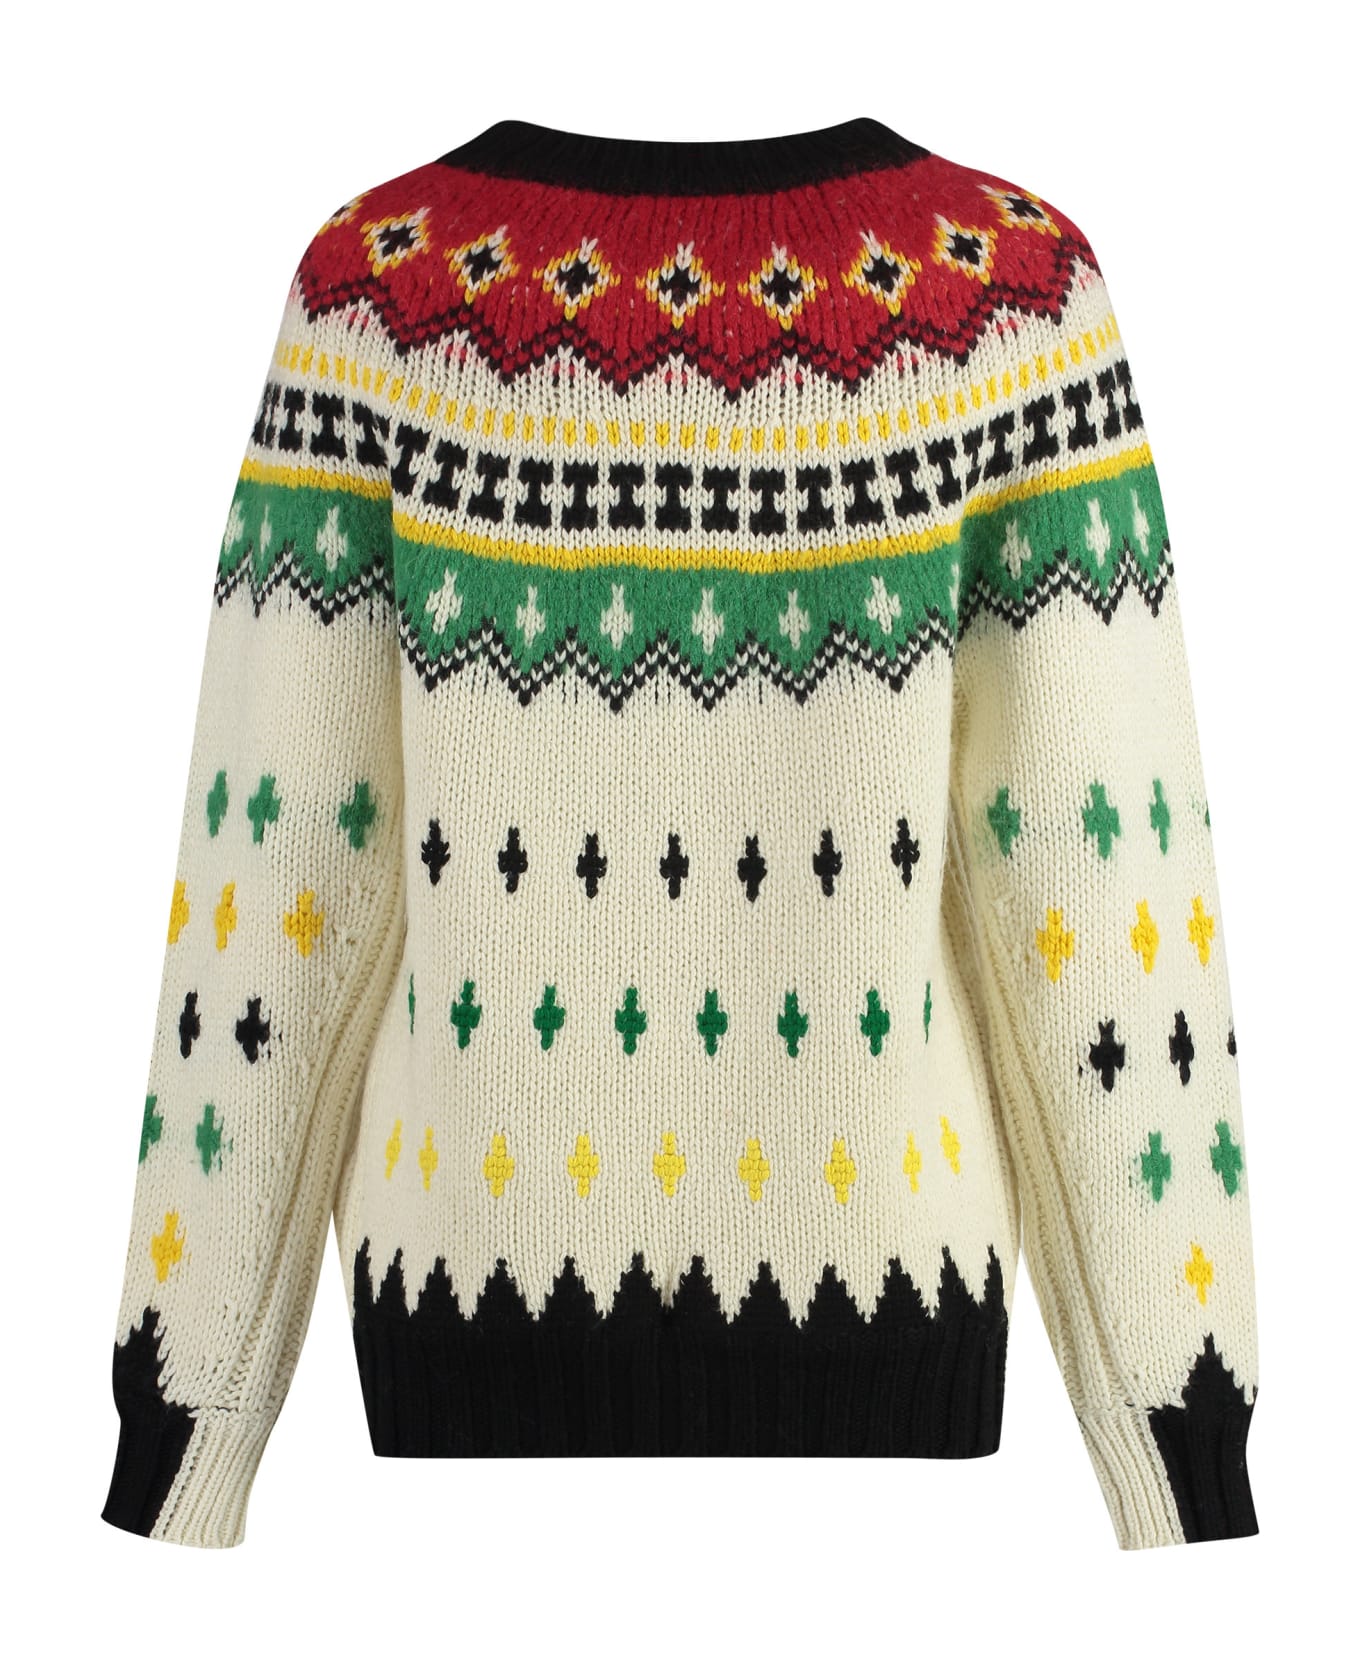 Moncler Grenoble Jacquard Wool Sweater - Multicolor